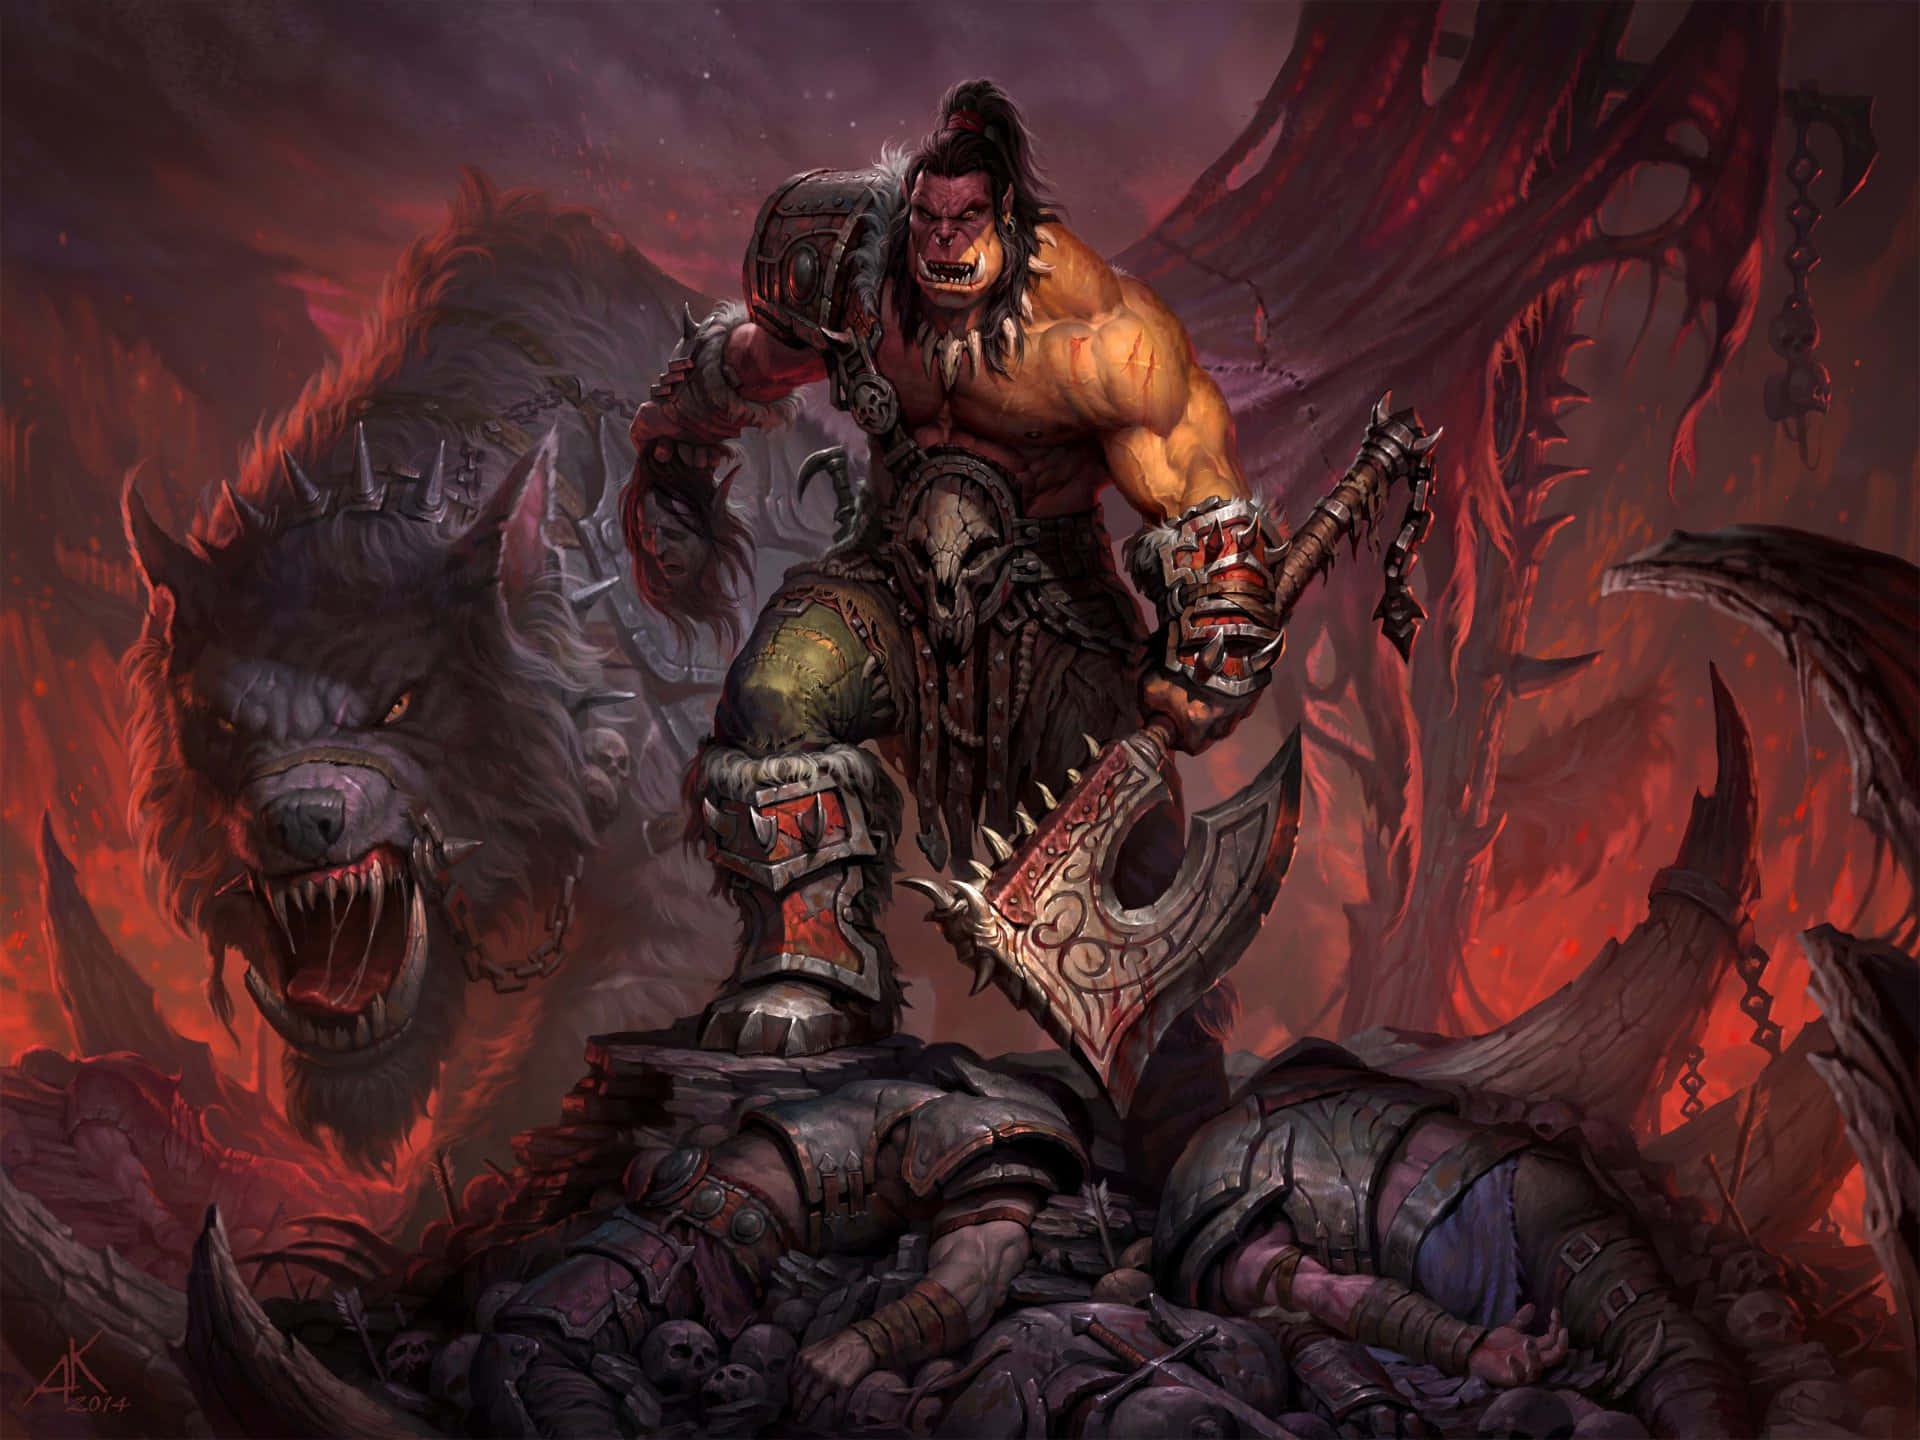 Epic Encounter In World Of Warcraft: Warlords Of Draenor Wallpaper